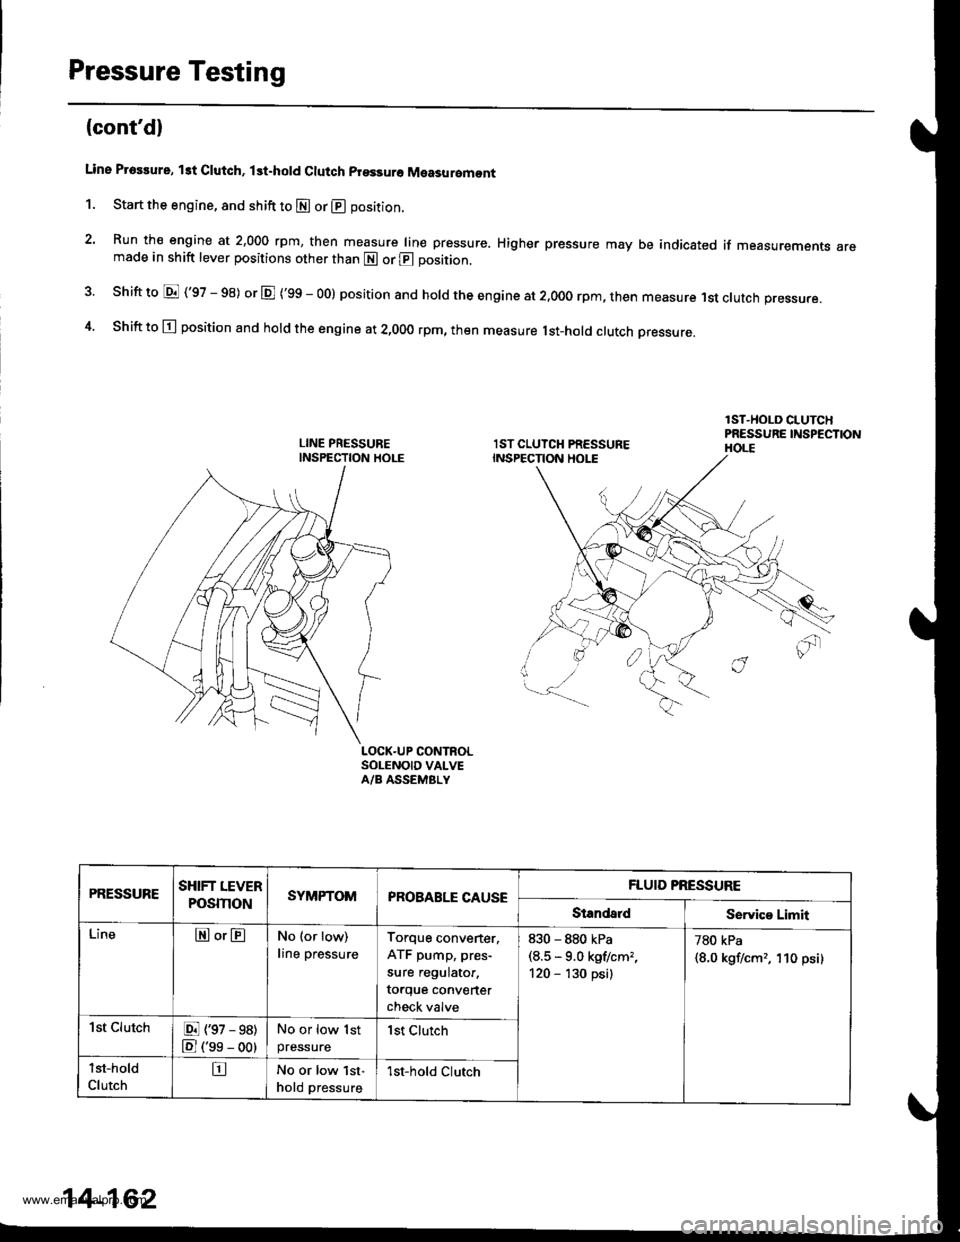 HONDA CR-V 1998 RD1-RD3 / 1.G Service Manual 
Pressure Testing
(contd)
Line Proslure, lst Clutch, lst.hold Clutch prsssuro Measuromont
1. Start the engine, and shift to E or @ position.
2. Run the engine at 2,000 rpm, then measure line pressure